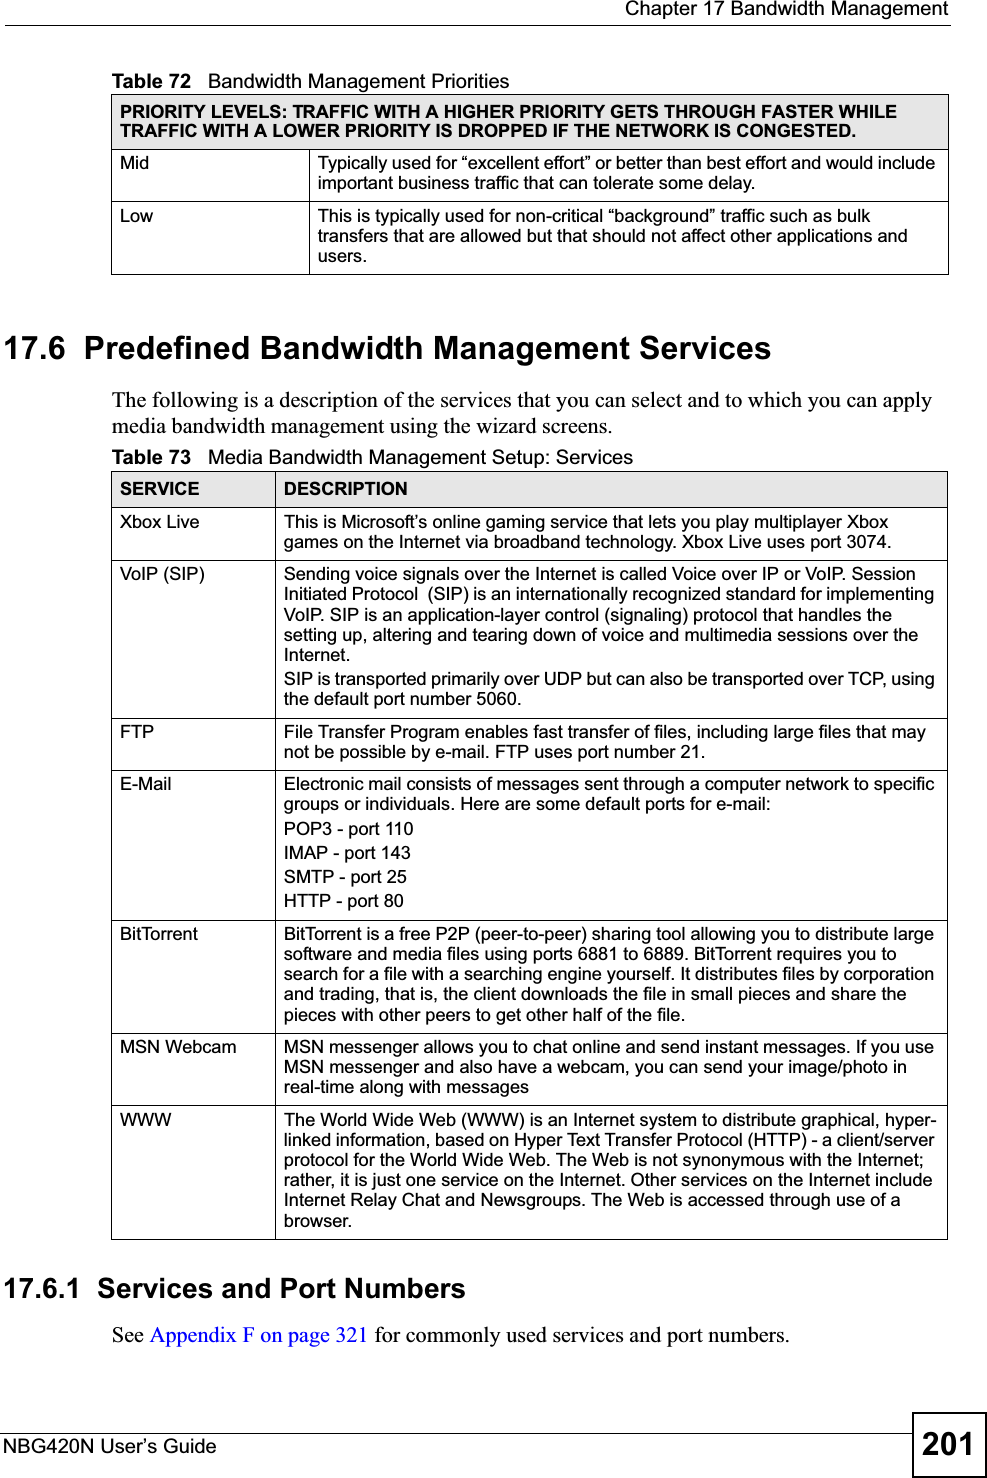  Chapter 17 Bandwidth ManagementNBG420N User’s Guide 20117.6  Predefined Bandwidth Management ServicesThe following is a description of the services that you can select and to which you can apply media bandwidth management using the wizard screens. 17.6.1  Services and Port NumbersSee Appendix F on page 321 for commonly used services and port numbers.Mid  Typically used for “excellent effort” or better than best effort and would include important business traffic that can tolerate some delay.Low This is typically used for non-critical “background” traffic such as bulk transfers that are allowed but that should not affect other applications and users.Table 72   Bandwidth Management PrioritiesPRIORITY LEVELS: TRAFFIC WITH A HIGHER PRIORITY GETS THROUGH FASTER WHILE TRAFFIC WITH A LOWER PRIORITY IS DROPPED IF THE NETWORK IS CONGESTED.Table 73   Media Bandwidth Management Setup: ServicesSERVICE DESCRIPTIONXbox Live This is Microsoft’s online gaming service that lets you play multiplayer Xbox games on the Internet via broadband technology. Xbox Live uses port 3074.VoIP (SIP) Sending voice signals over the Internet is called Voice over IP or VoIP. Session Initiated Protocol  (SIP) is an internationally recognized standard for implementing VoIP. SIP is an application-layer control (signaling) protocol that handles the setting up, altering and tearing down of voice and multimedia sessions over the Internet.SIP is transported primarily over UDP but can also be transported over TCP, using the default port number 5060. FTP File Transfer Program enables fast transfer of files, including large files that may not be possible by e-mail. FTP uses port number 21.E-Mail Electronic mail consists of messages sent through a computer network to specific groups or individuals. Here are some default ports for e-mail: POP3 - port 110IMAP - port 143SMTP - port 25HTTP - port 80BitTorrent BitTorrent is a free P2P (peer-to-peer) sharing tool allowing you to distribute large software and media files using ports 6881 to 6889. BitTorrent requires you to search for a file with a searching engine yourself. It distributes files by corporation and trading, that is, the client downloads the file in small pieces and share the pieces with other peers to get other half of the file.MSN Webcam MSN messenger allows you to chat online and send instant messages. If you use MSN messenger and also have a webcam, you can send your image/photo in real-time along with messagesWWW The World Wide Web (WWW) is an Internet system to distribute graphical, hyper-linked information, based on Hyper Text Transfer Protocol (HTTP) - a client/server protocol for the World Wide Web. The Web is not synonymous with the Internet; rather, it is just one service on the Internet. Other services on the Internet include Internet Relay Chat and Newsgroups. The Web is accessed through use of a browser.